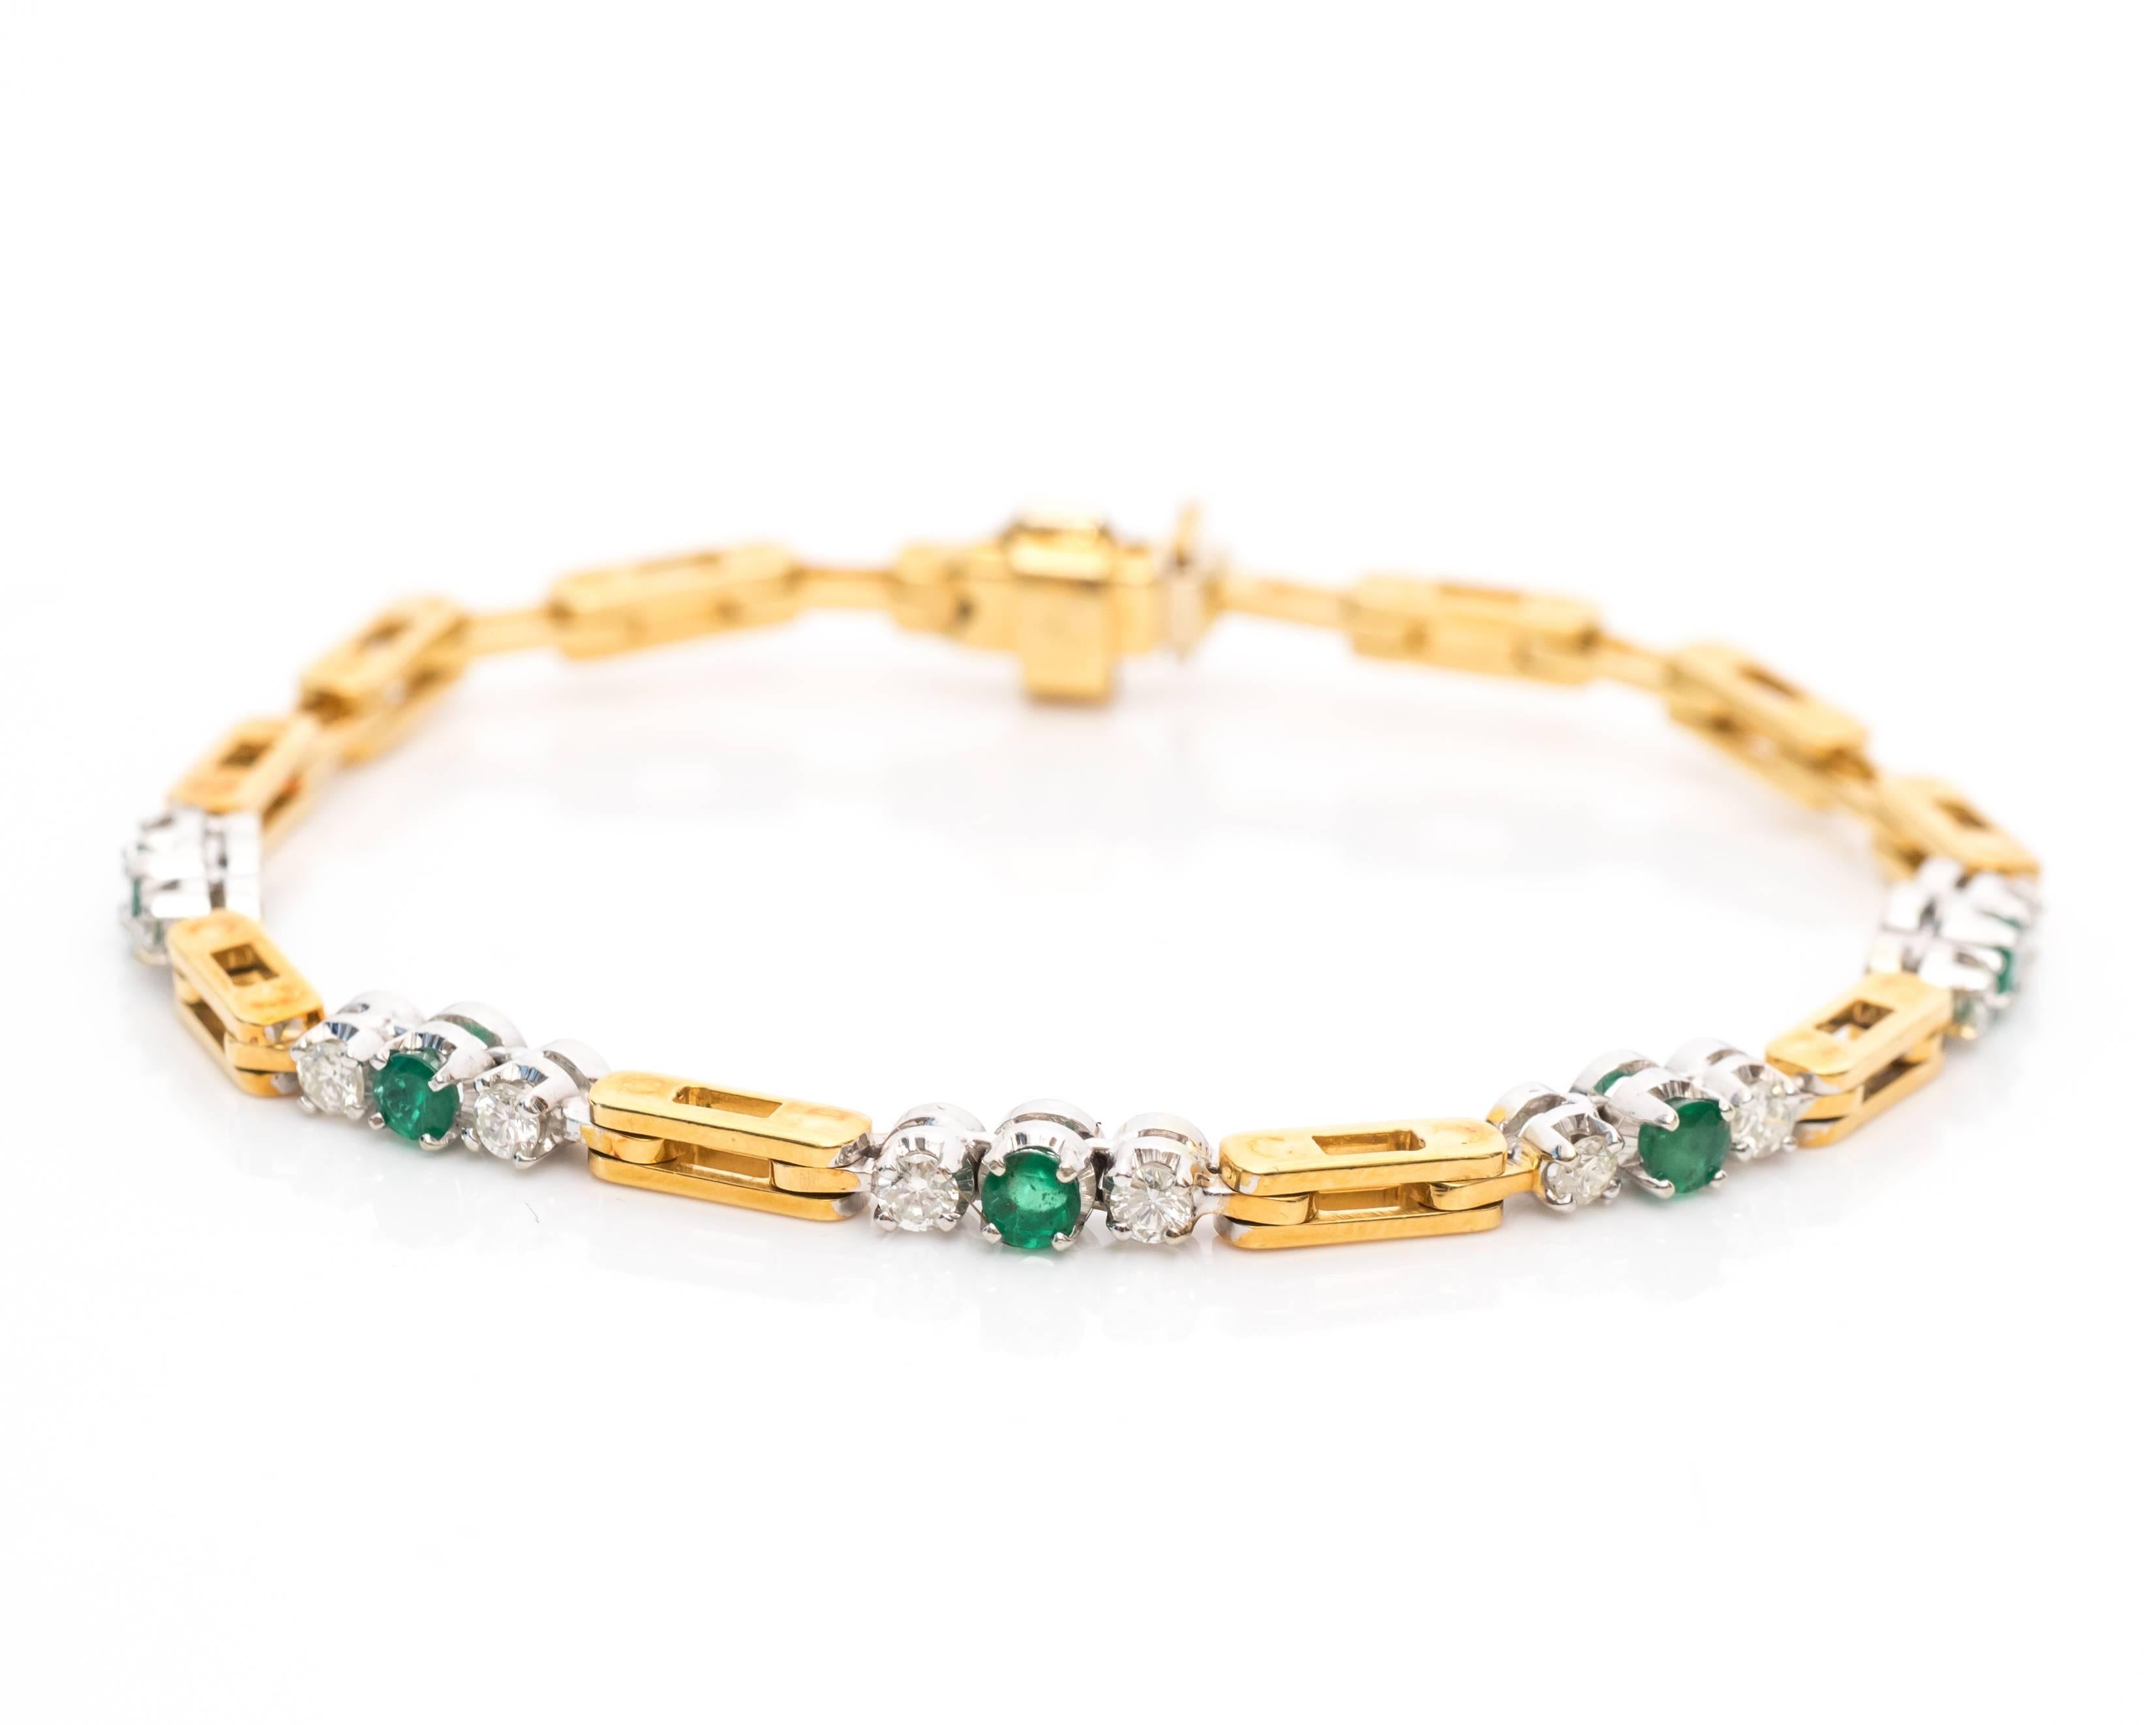 Gorgeous Bracelet from 1950s featuring Stunning Diamonds and Colombian Emeralds. Each Emerald is bordered by a Diamond. This pattern continues for five rows, featuring five emeralds and ten diamonds. The Yellow Gold also alternates within this